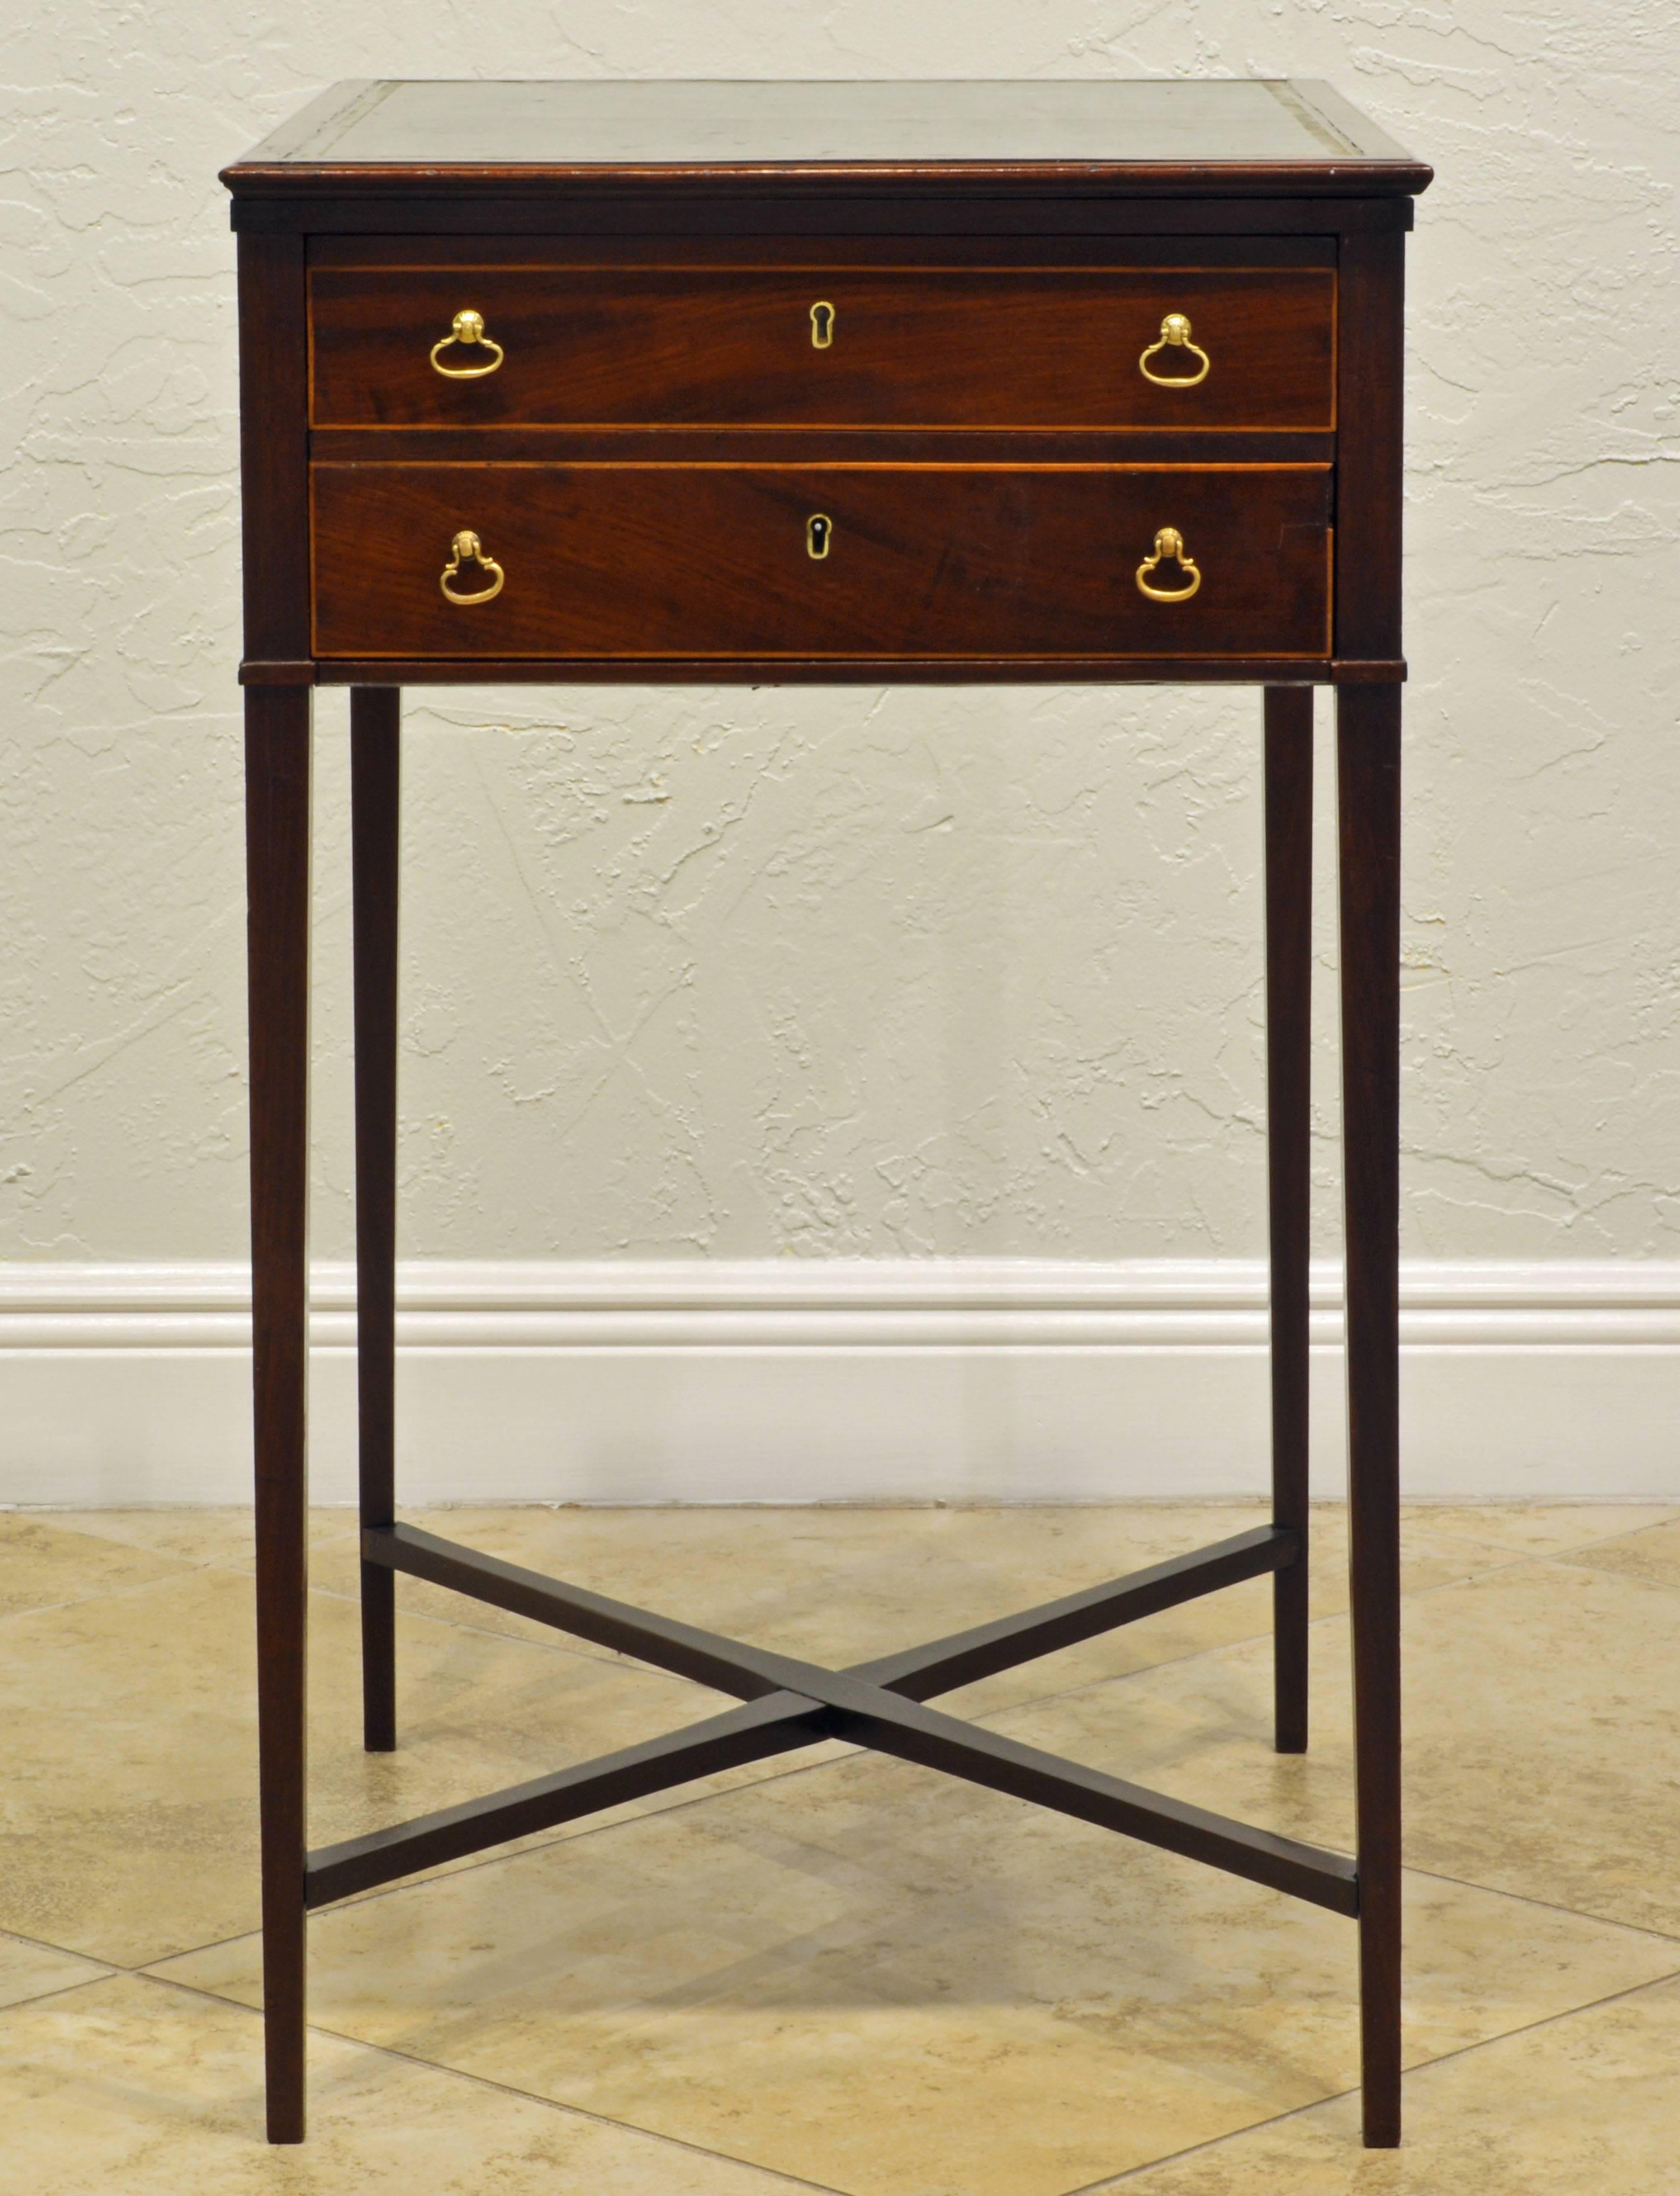 This interesting and unusual table features an adjustable sloping banded and gilt tooled green leather writing surface above two drawers on either side, one with inserts for writing tools, resting on square tapering legs united by crossed